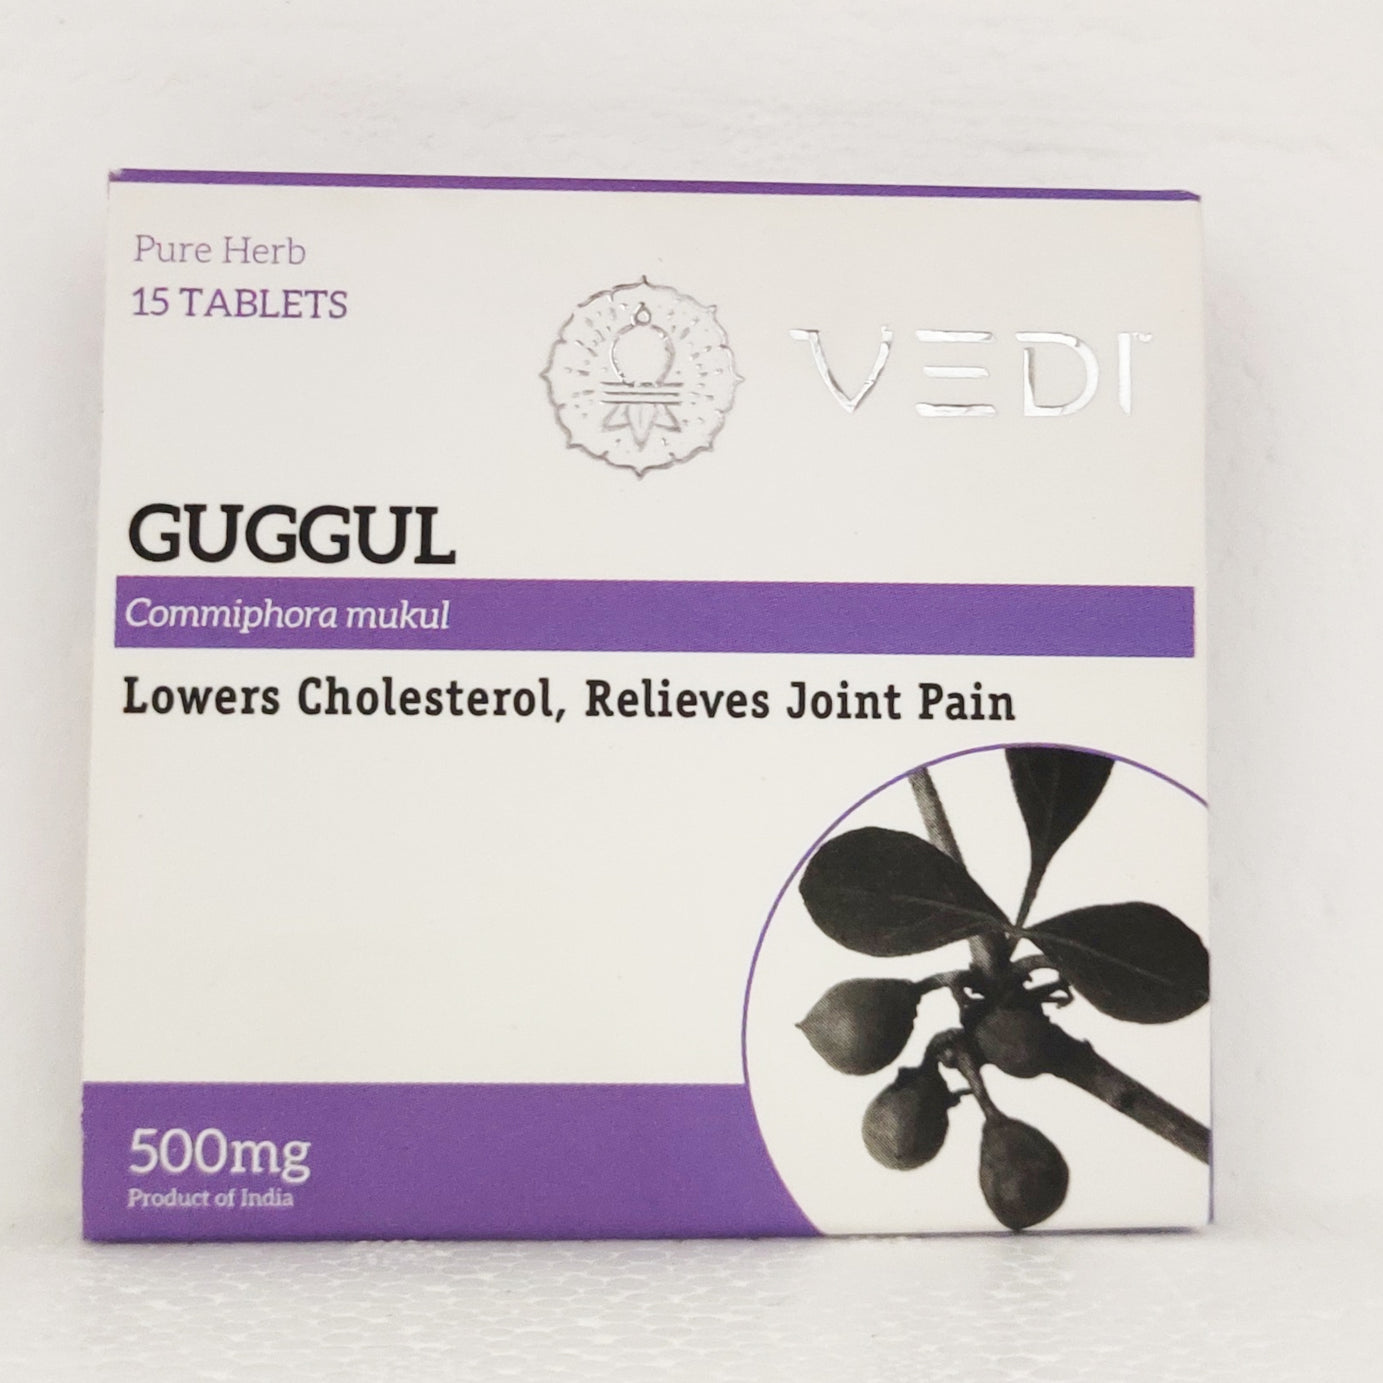 Shop Guggul tablets - 15tablets at price 99.00 from Vedi Herbals Online - Ayush Care